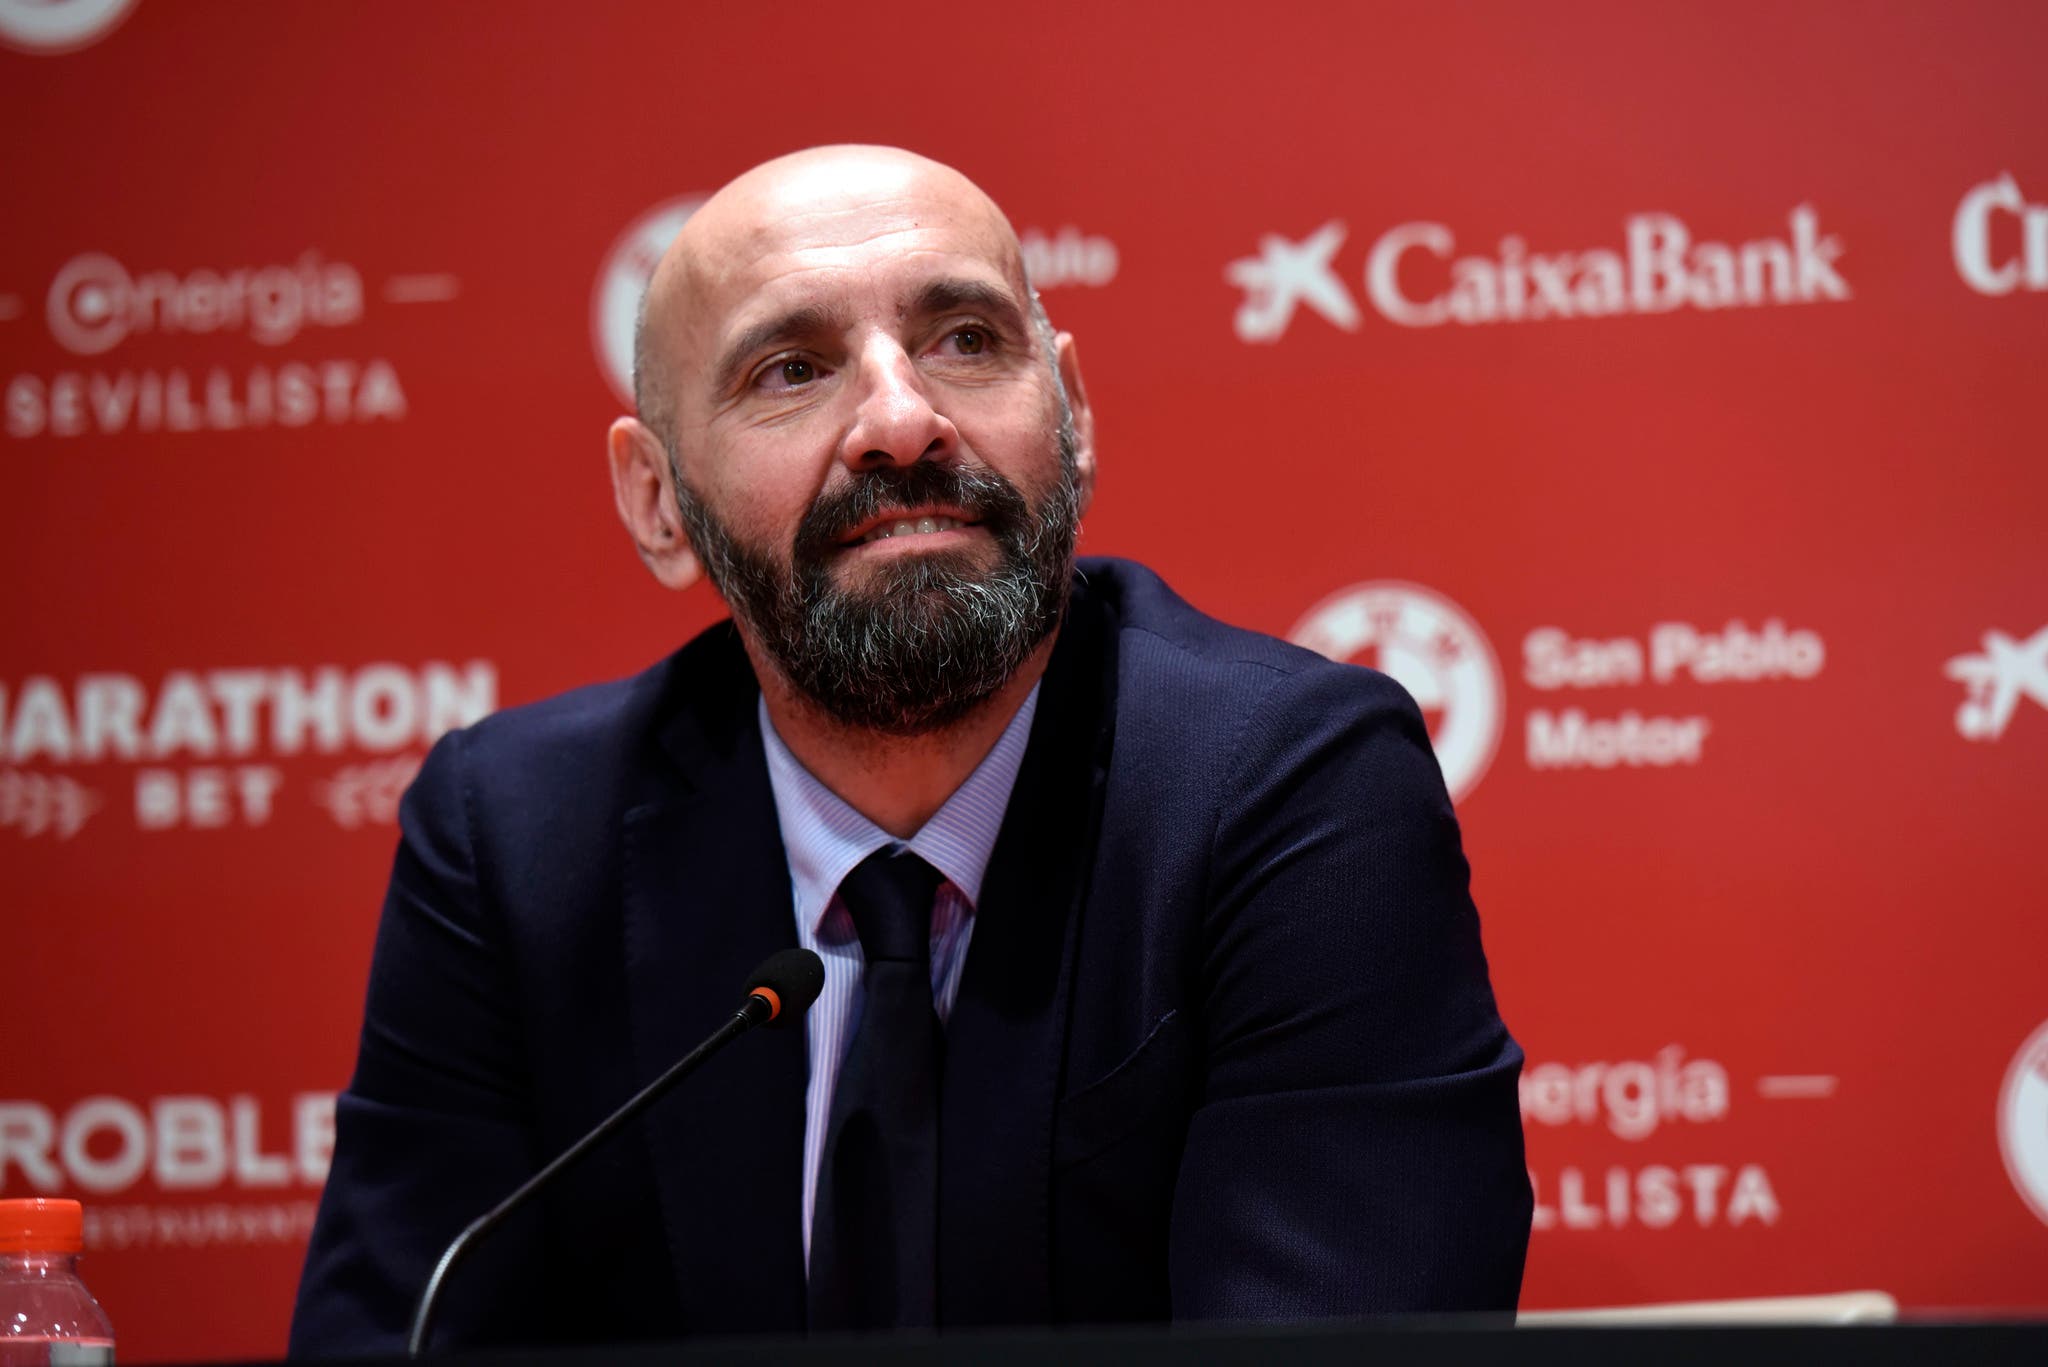 Key court at Sevilla FC discovers Monchi's new signing
